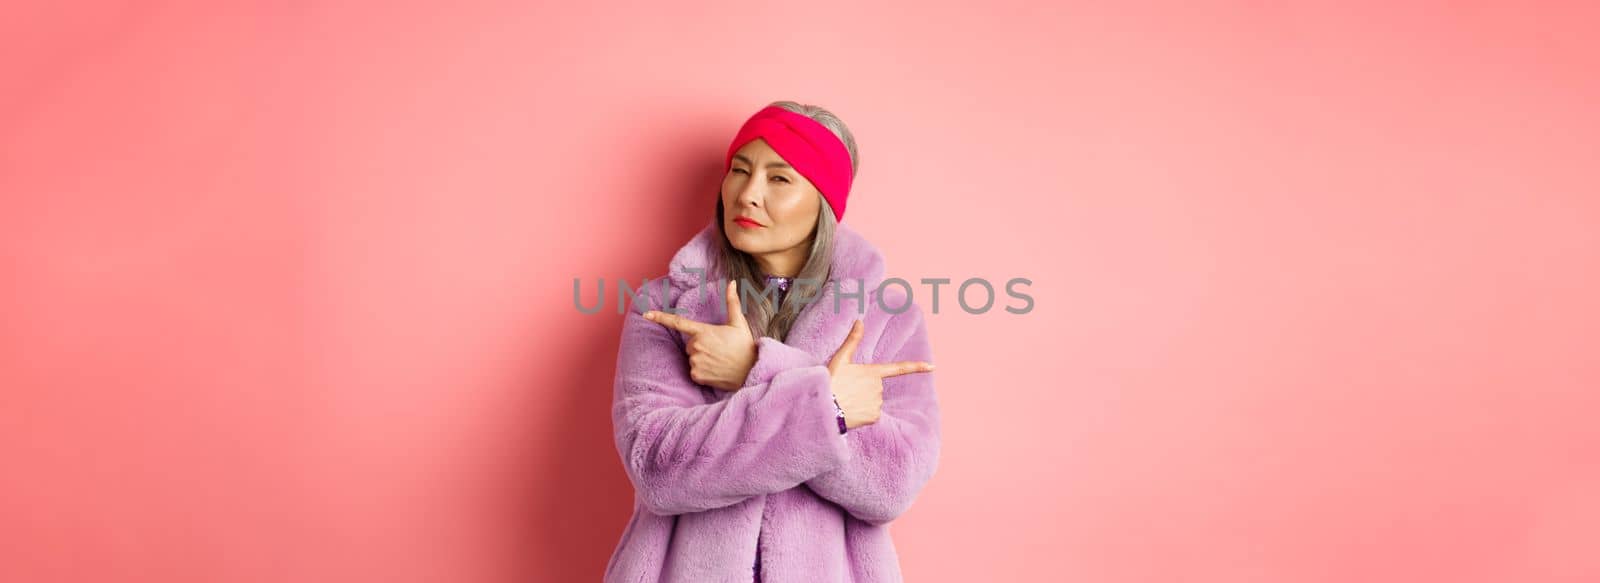 Fashion and shopping concept. Stylish asian mature woman making decision, squinting thoughtful while pointing fingers sideways, showing two variants on pink background.